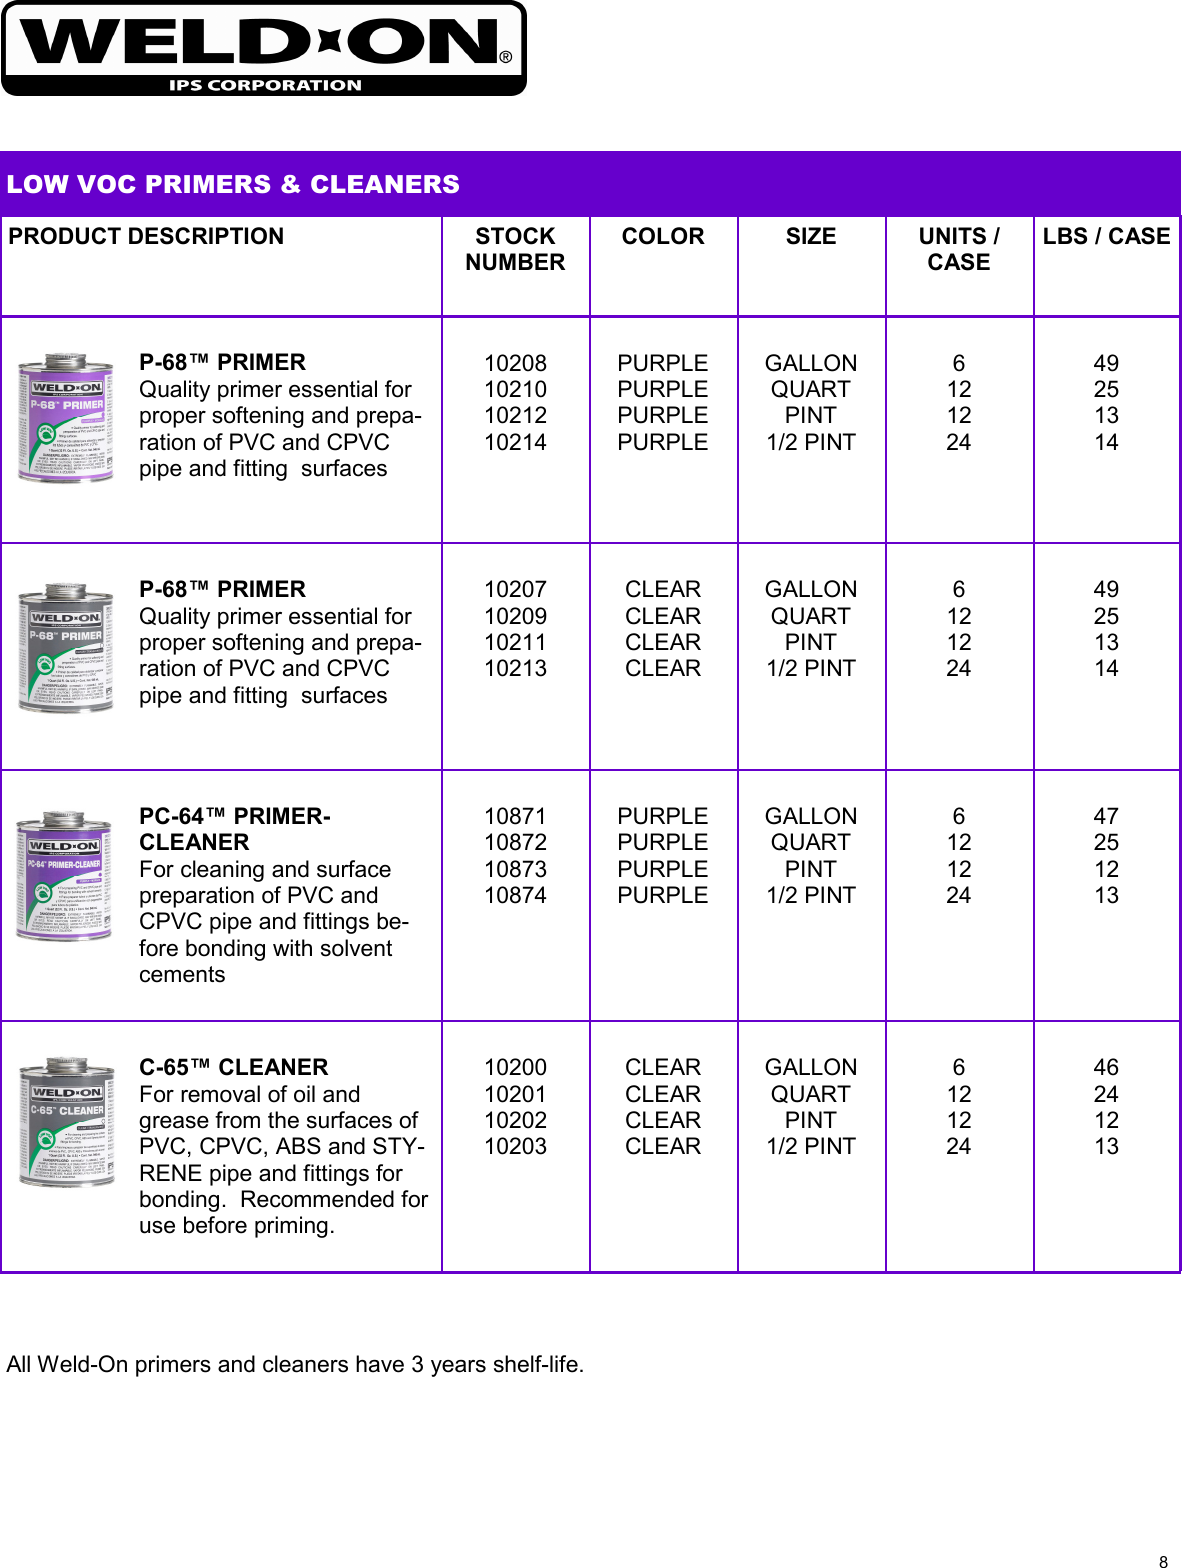 Page 9 of 12 - Duit Product Guide 09-2009